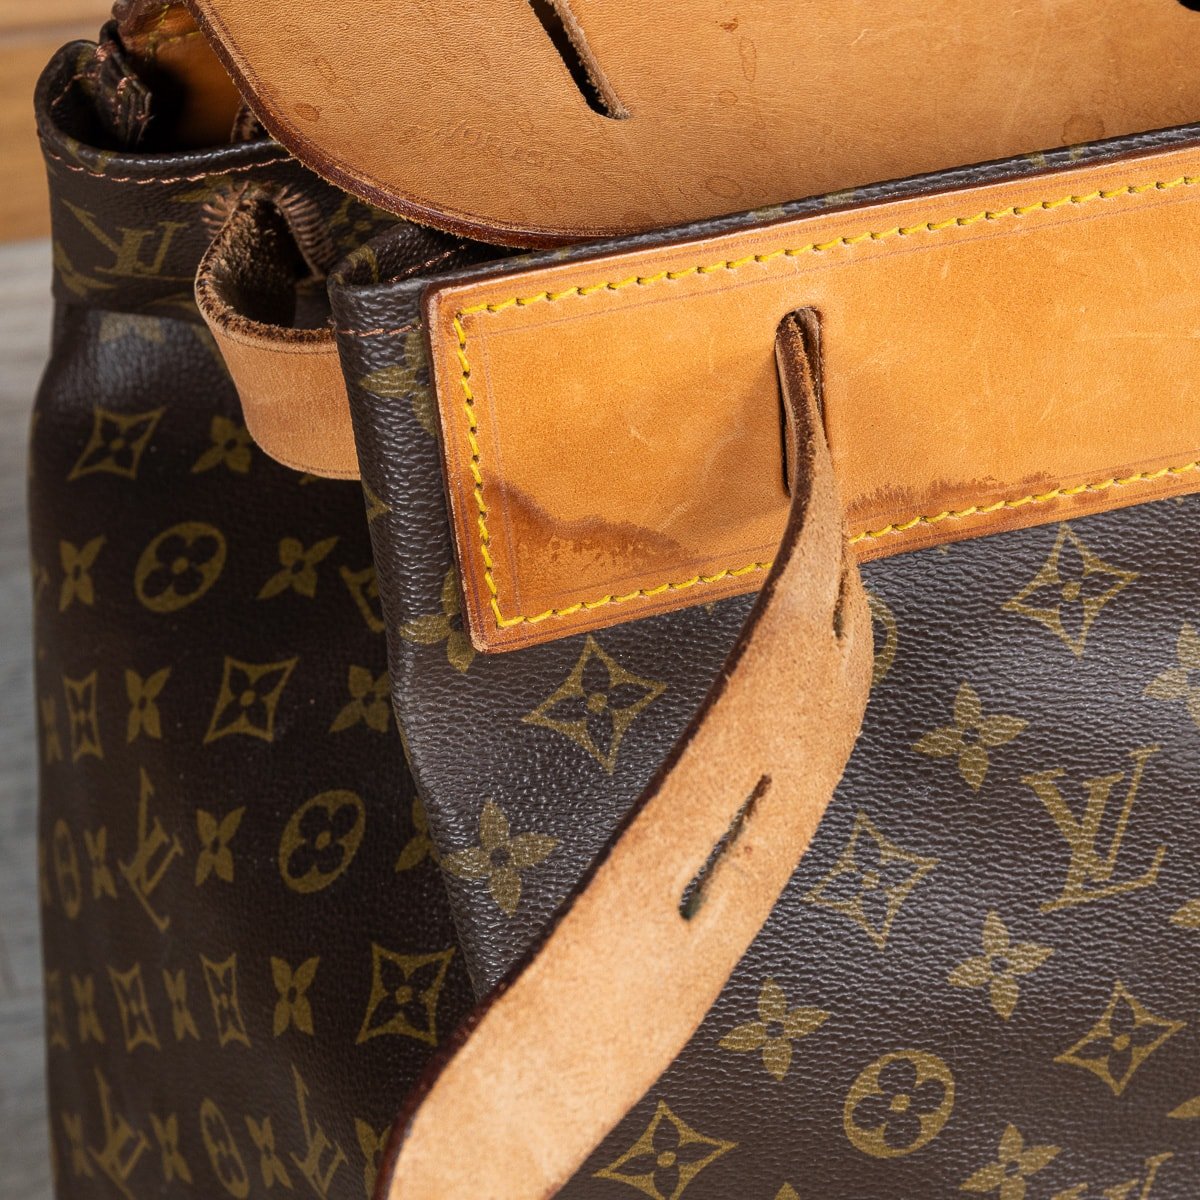 20thC LOUIS VUITTON STEAMER BAG IN MONOGRAM CANVAS, MADE IN FRANCE